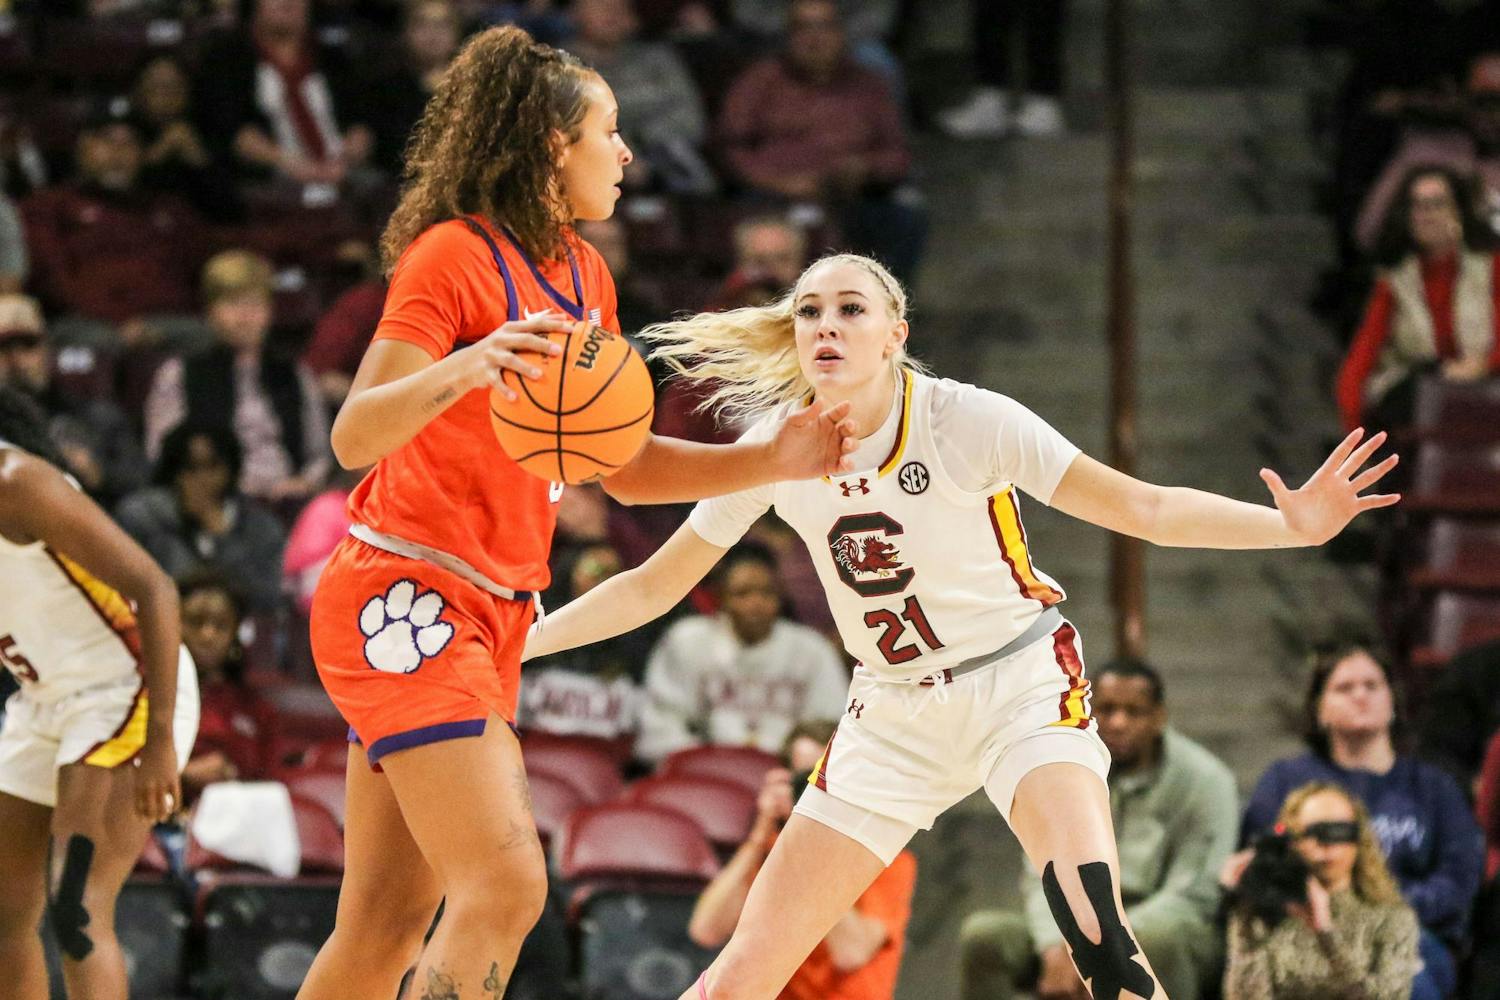 Sophomore forward Chloe Kitts plays back on defense during South Carolina’s game against Clemson at Colonial Life Arena on Nov. 16, 2023. The DME Academy alumna had one defensive rebound and one steal during the Gamecocks' 109-40 win over the Tigers.